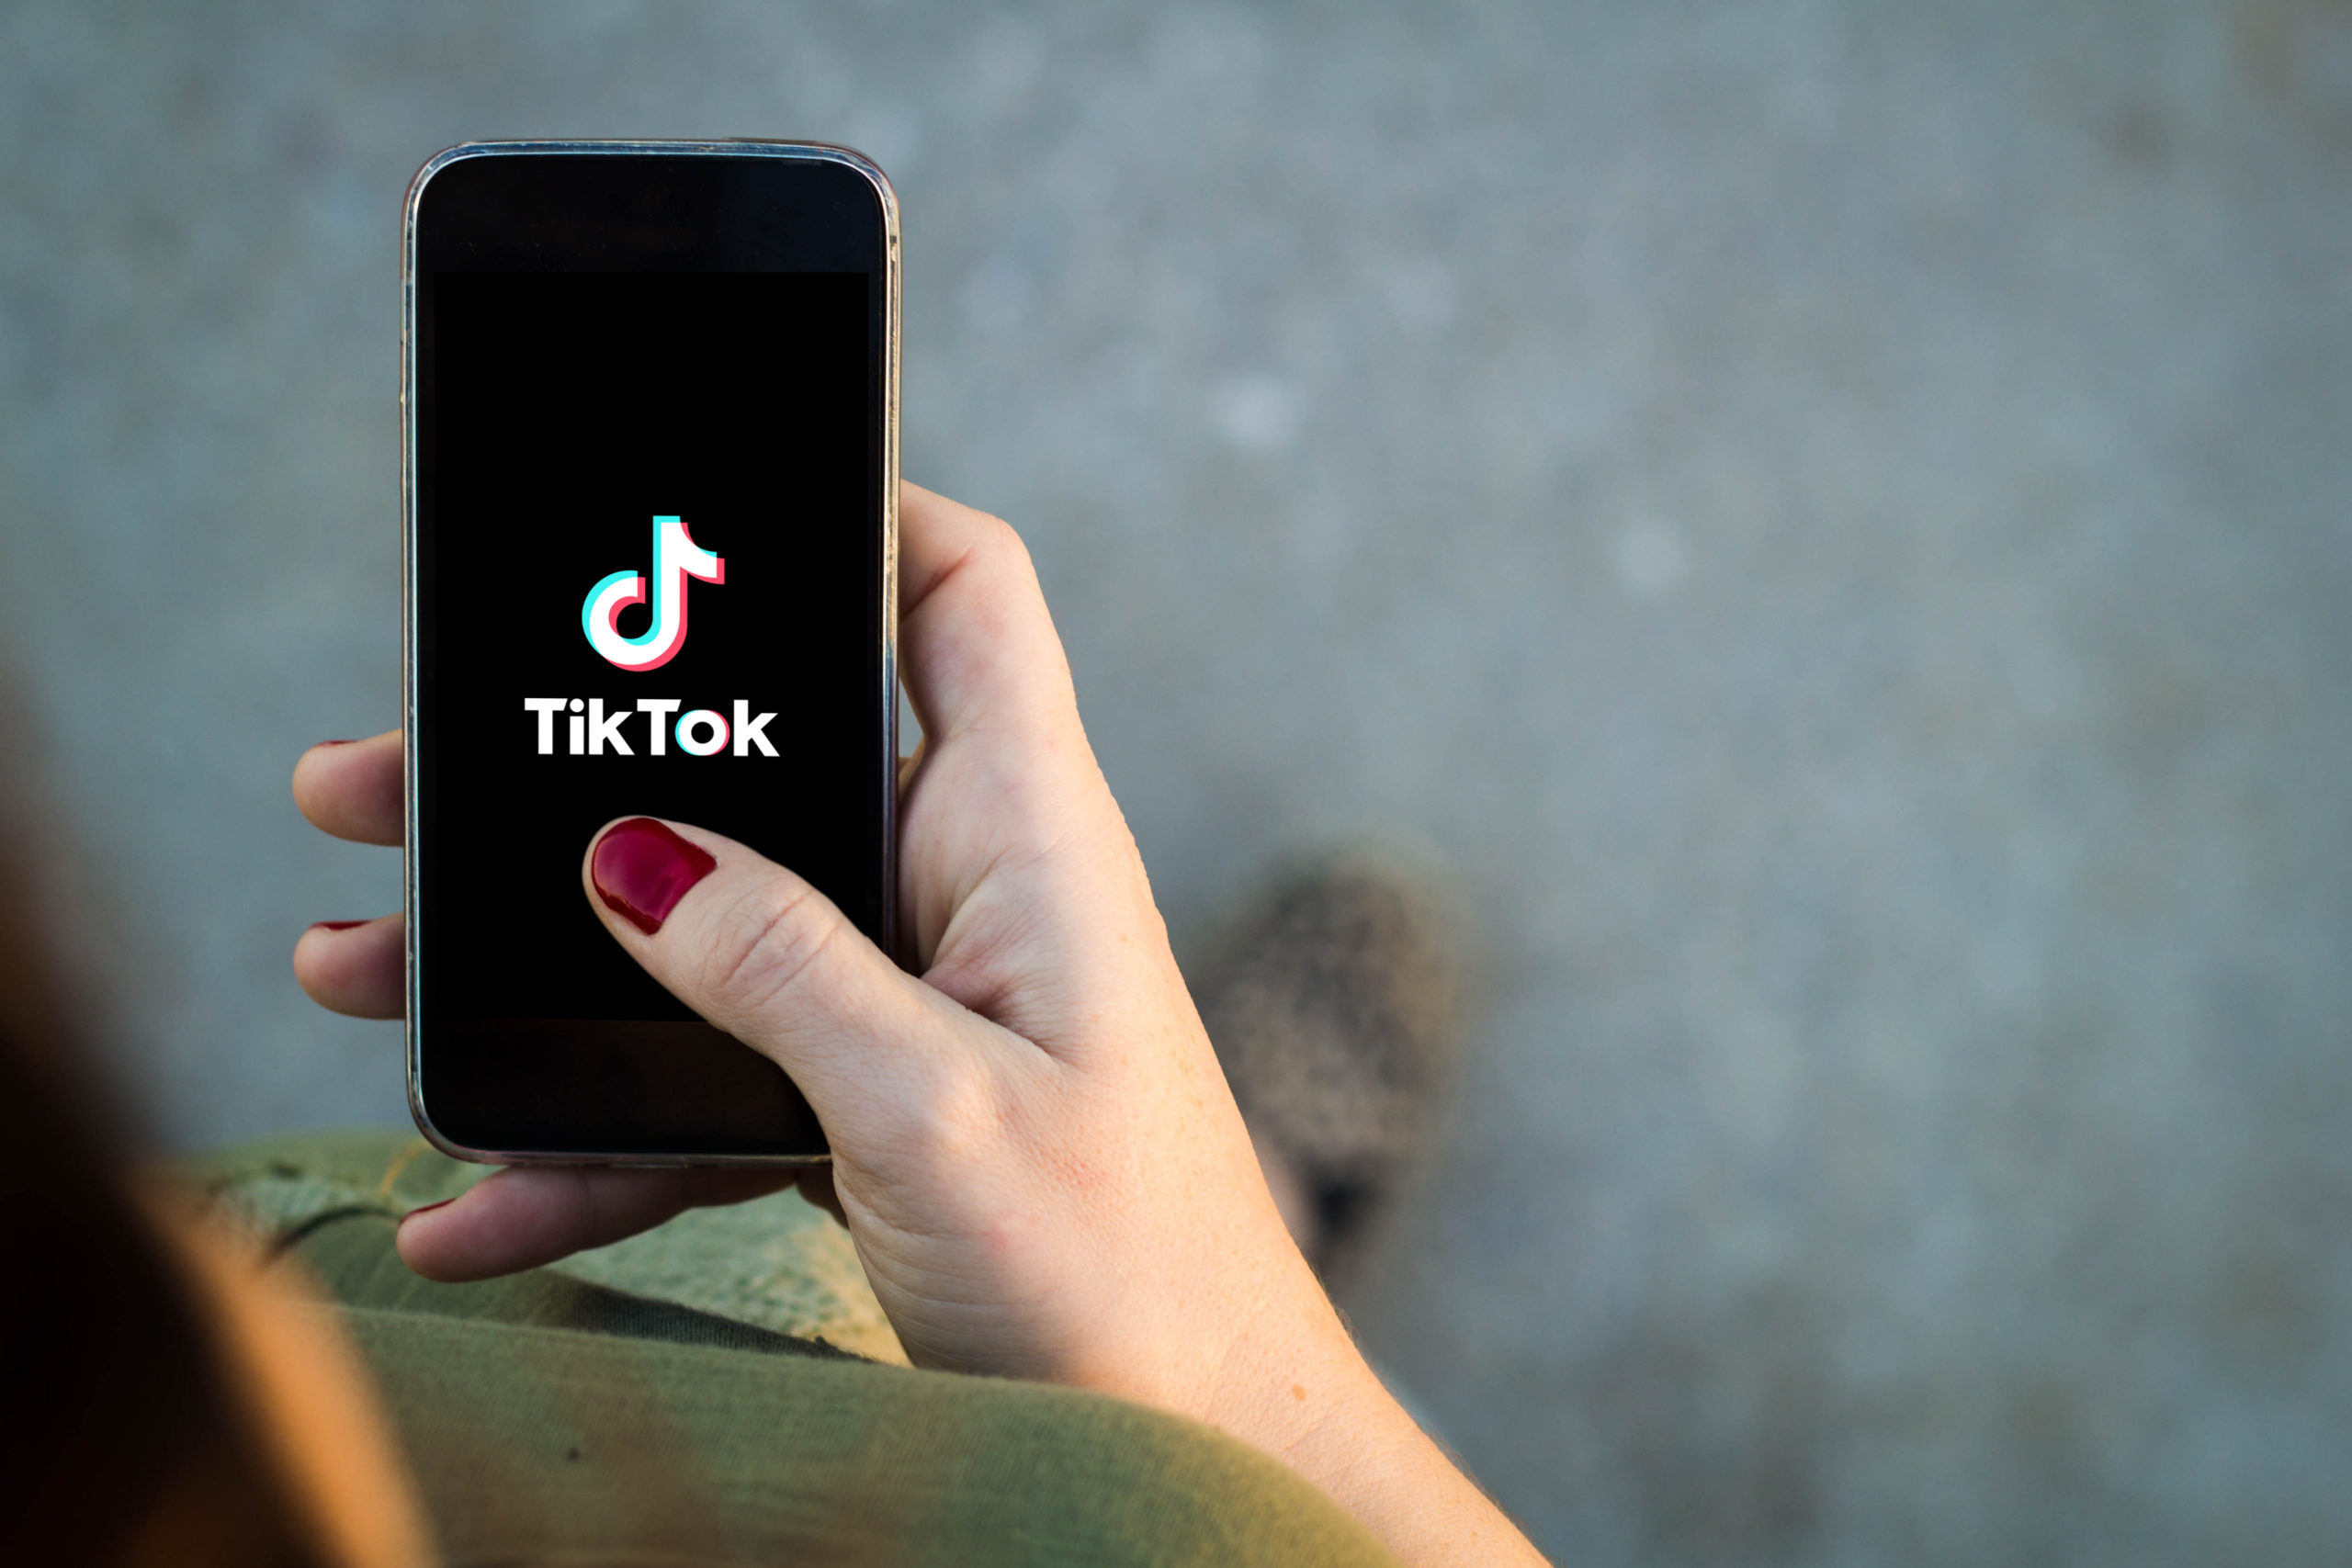 TikTok is the number one download and revenue earning app in the world